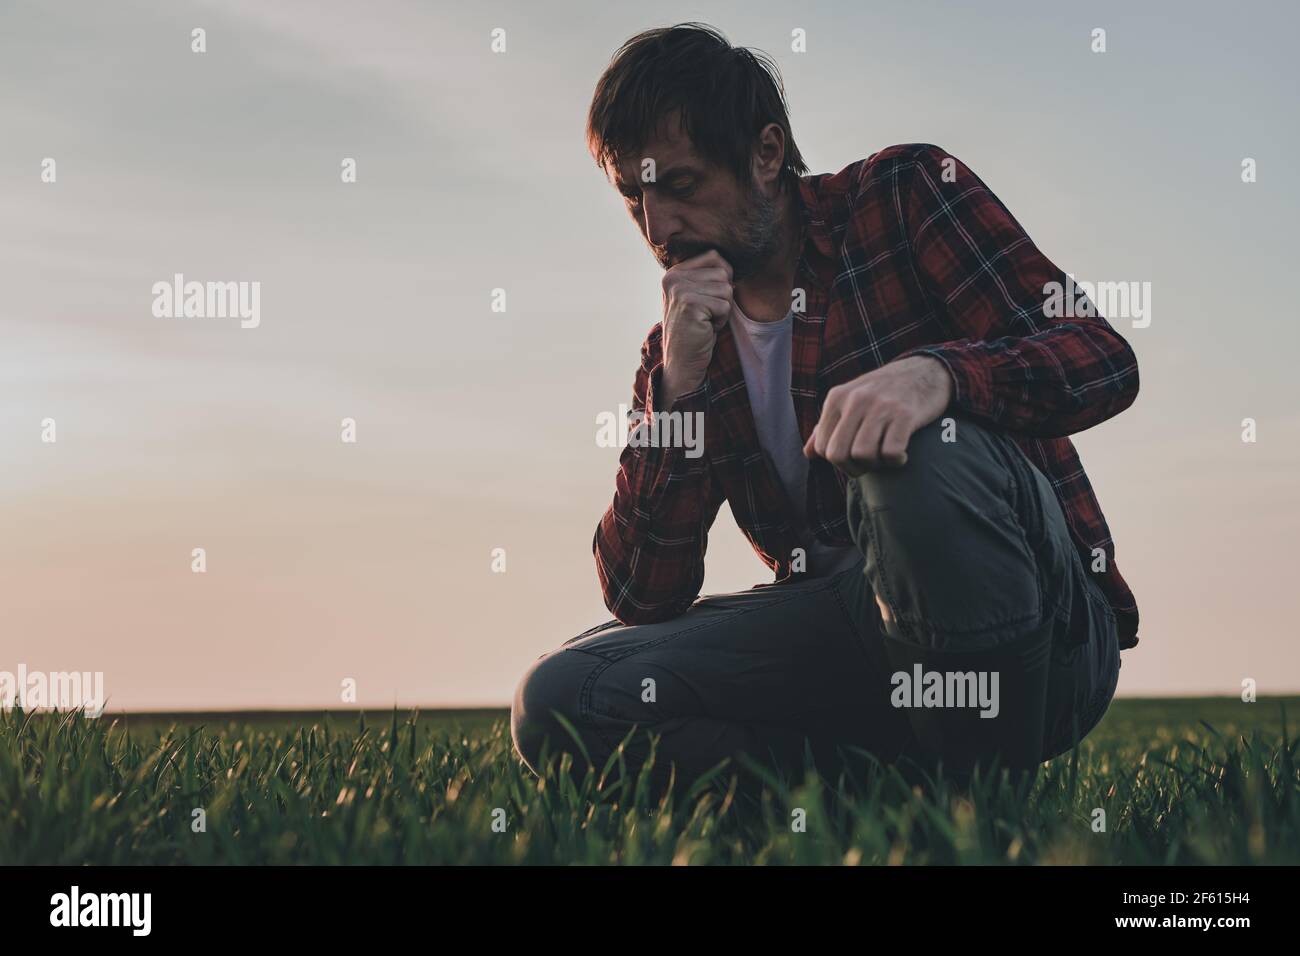 Agronomist in wheat crop field analyzing wheatgrass, farm worker working in springtime sunset, selective focus Stock Photo